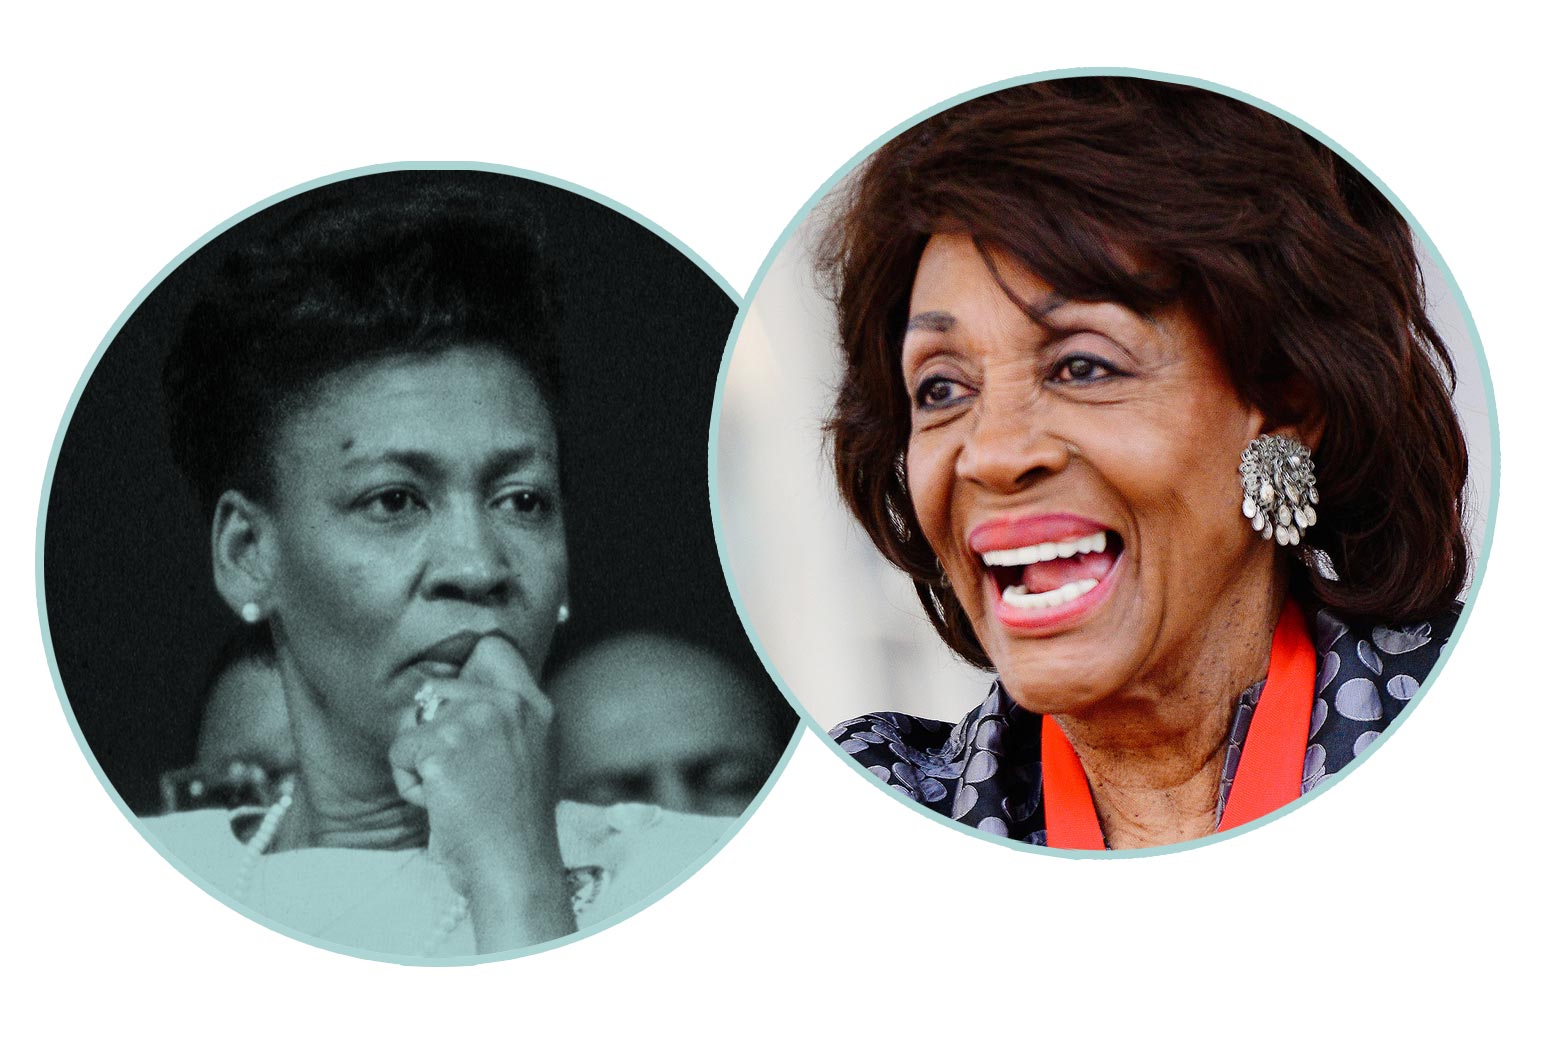 Maxine Waters, around age 45, and Maxine Waters, around age 82, as seen in black-and-white and color headshots.